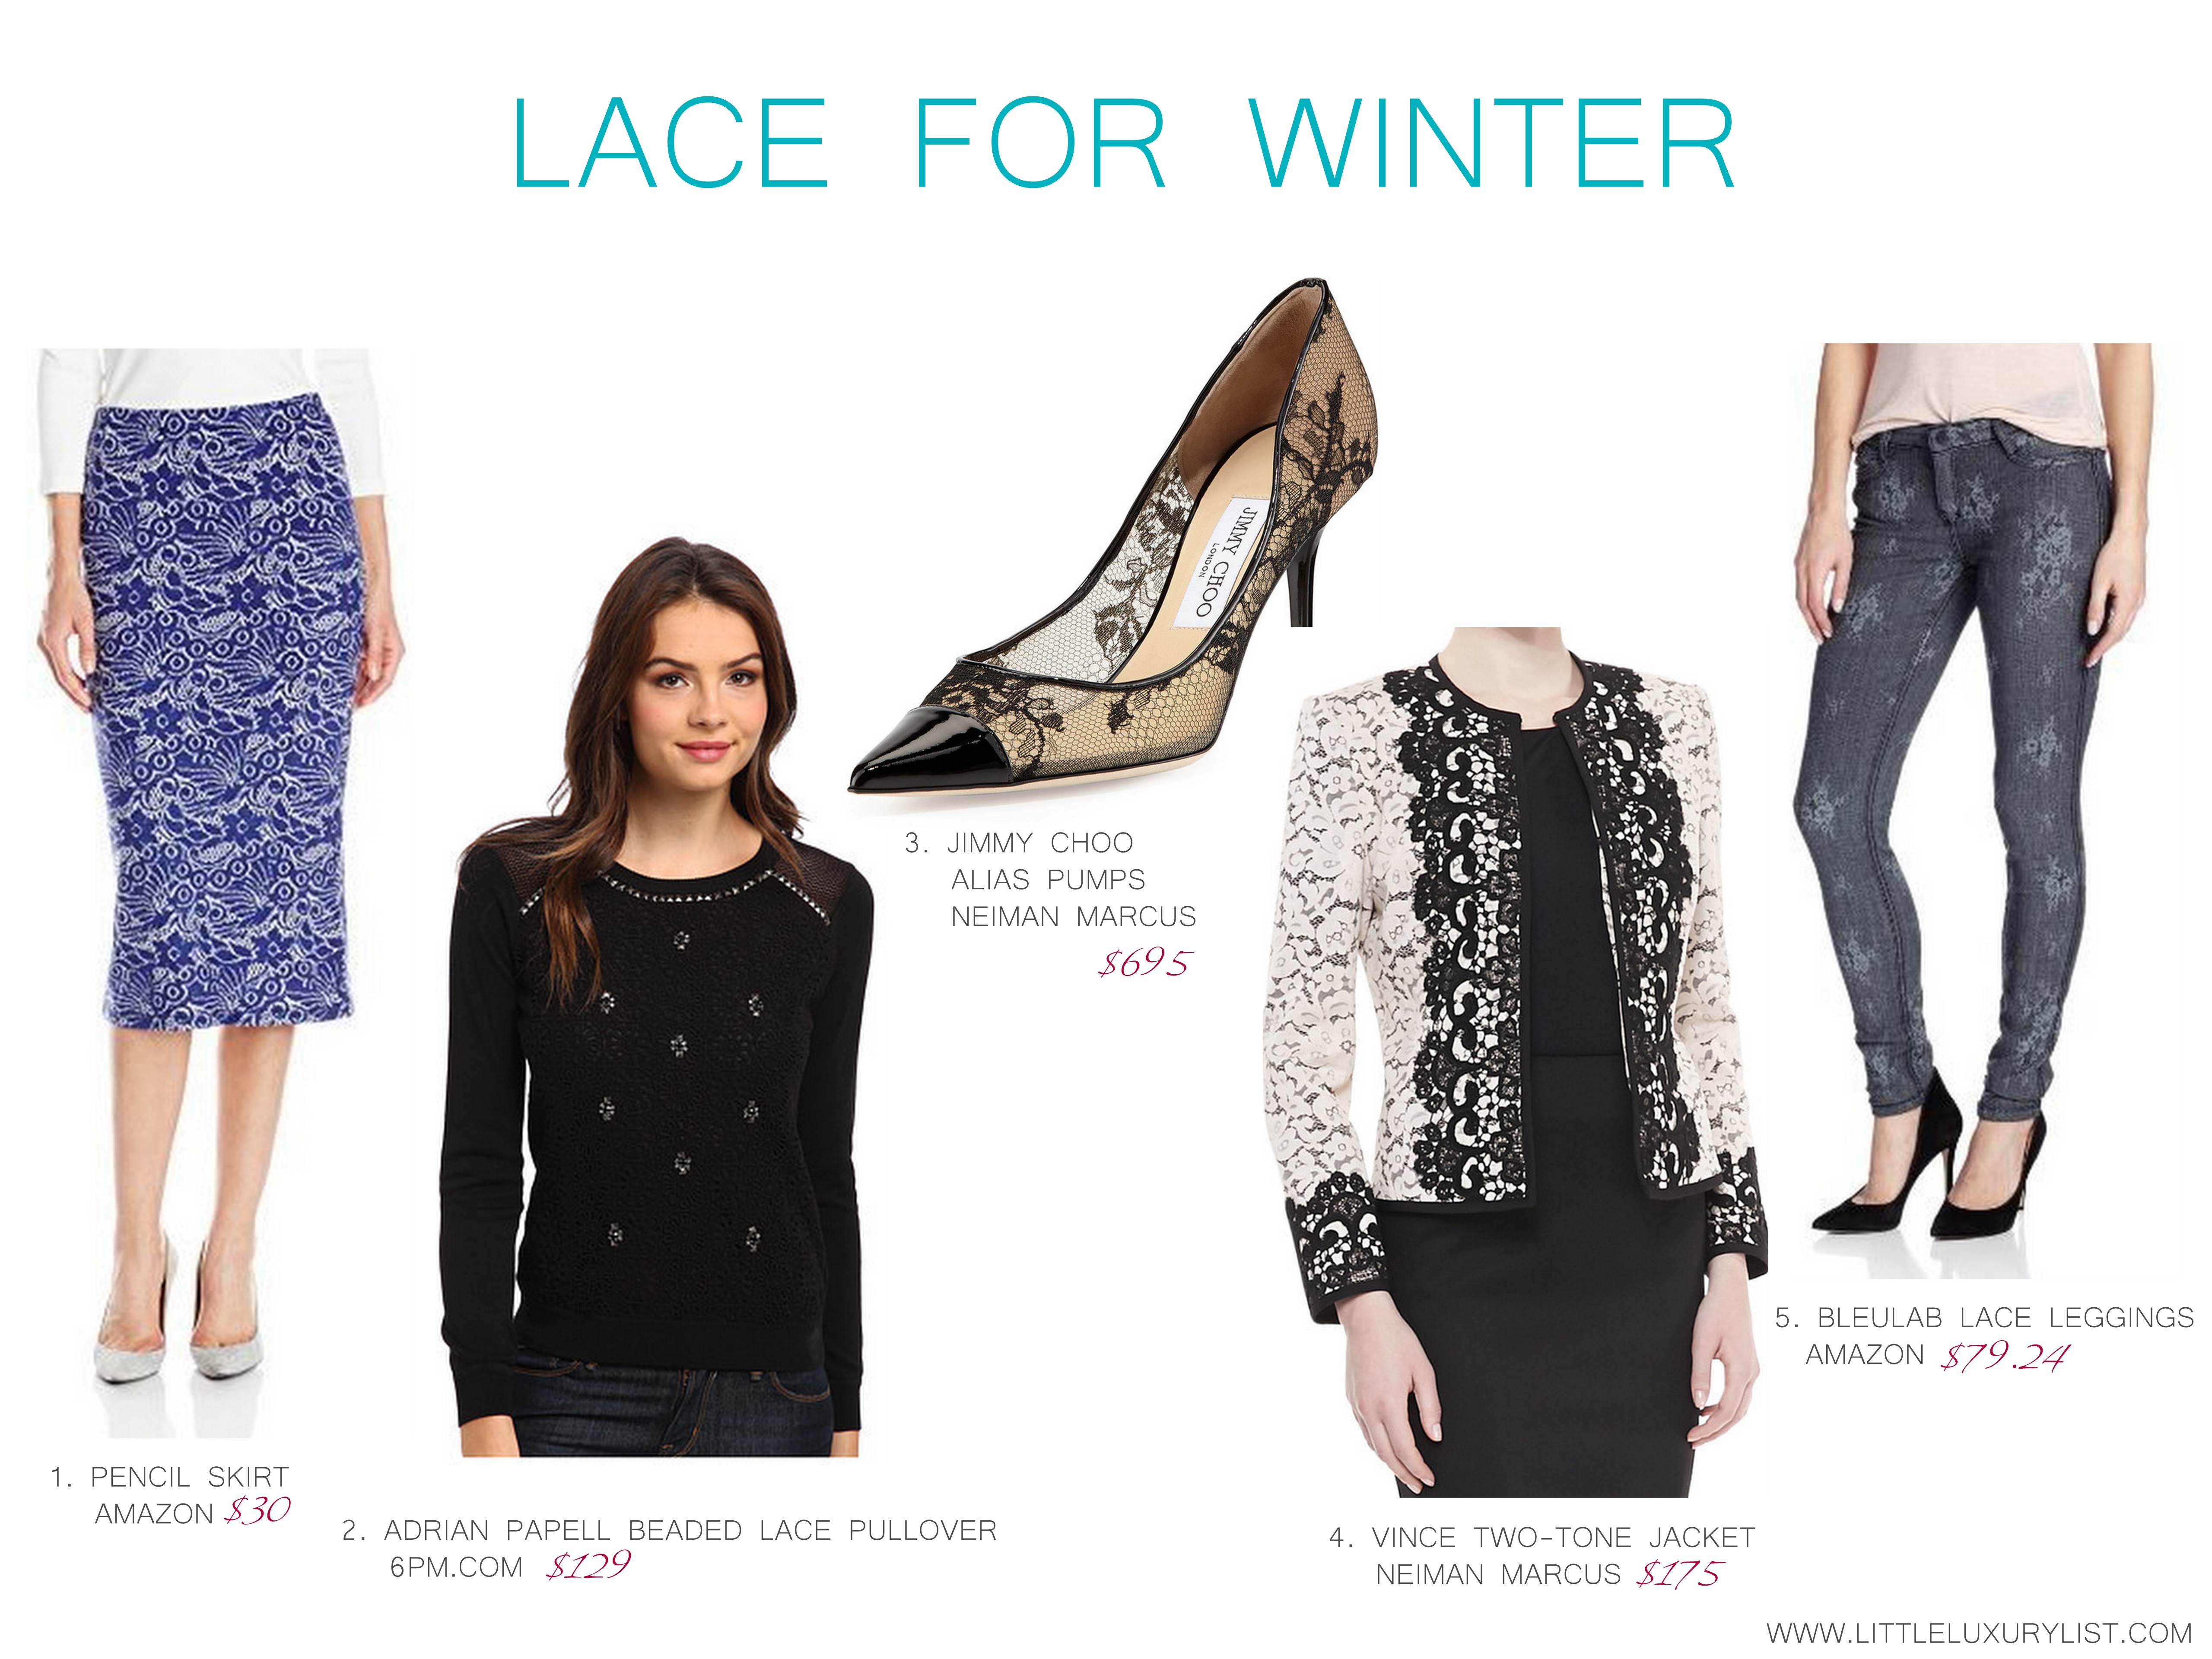 Lace for winter by little luxury list